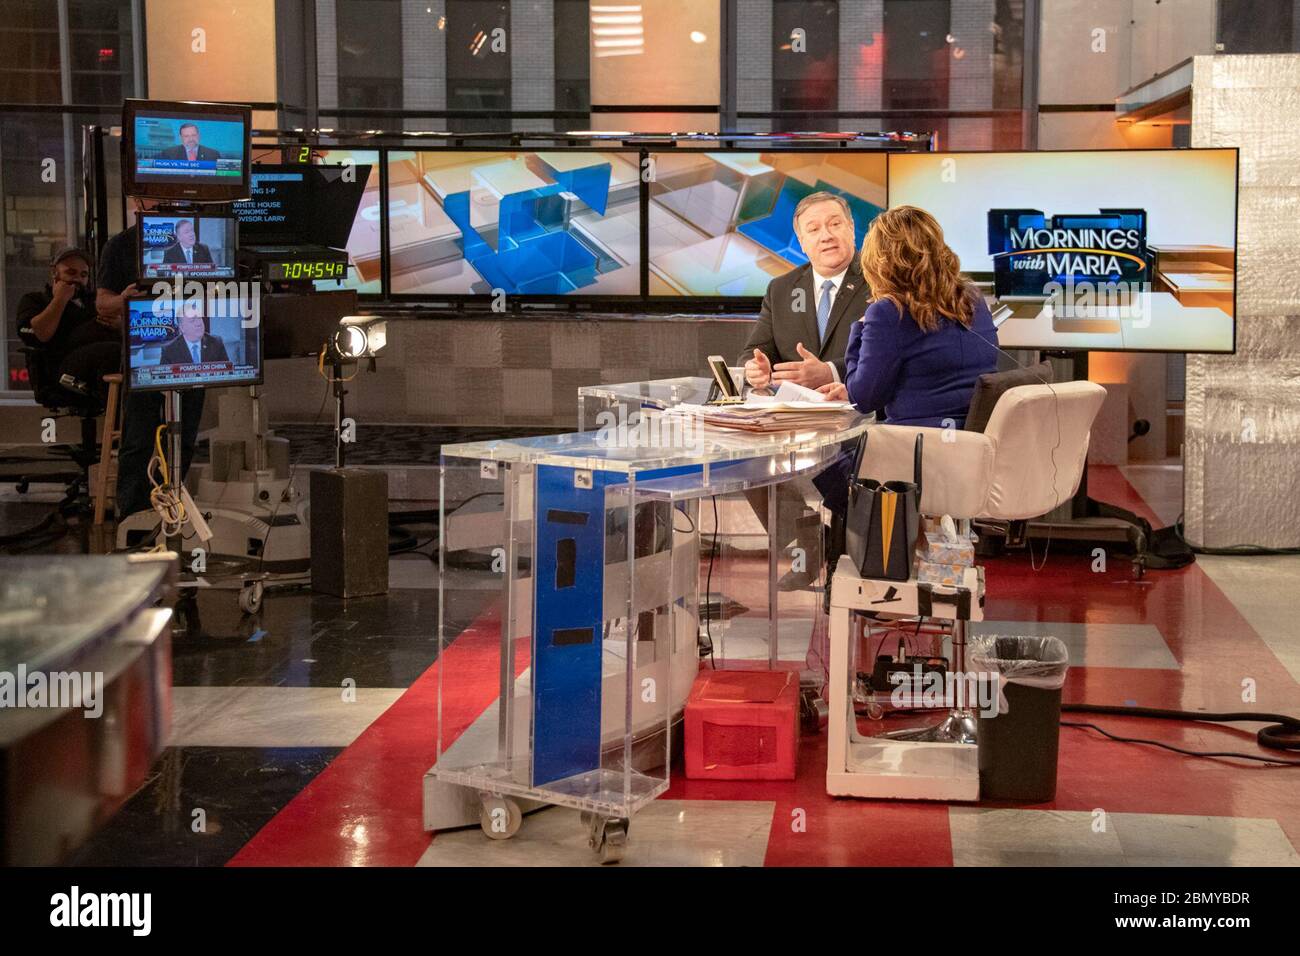 Secretary Pompeo participates in Media interview in NYC U.S. Secretary of State Michael R. Pompeo participates in a media interview with Maria Bartiromo in New York City, New York on April 5, 2019. Stock Photo